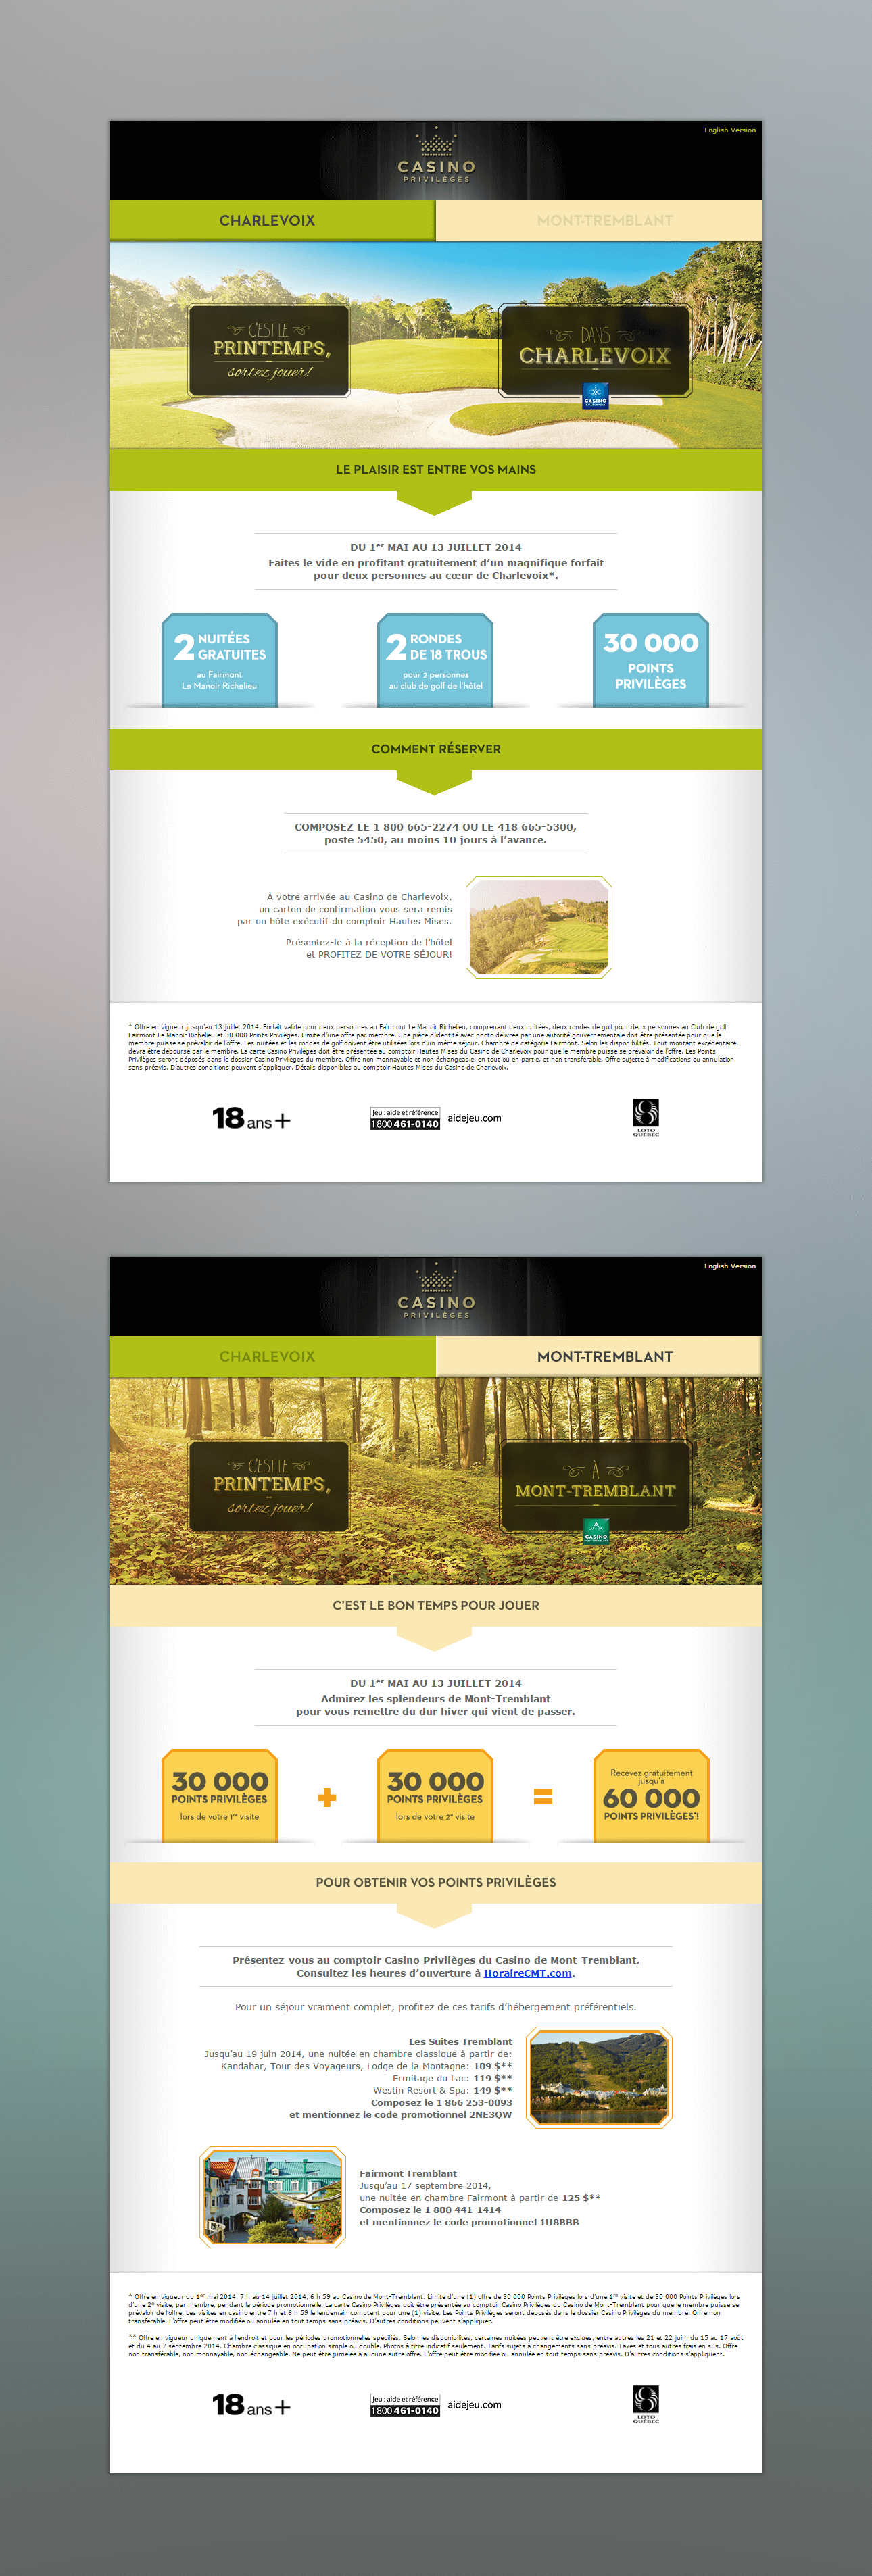 Screen capture of Charlevoix and Mont-Tremblant Casinos landing pages.